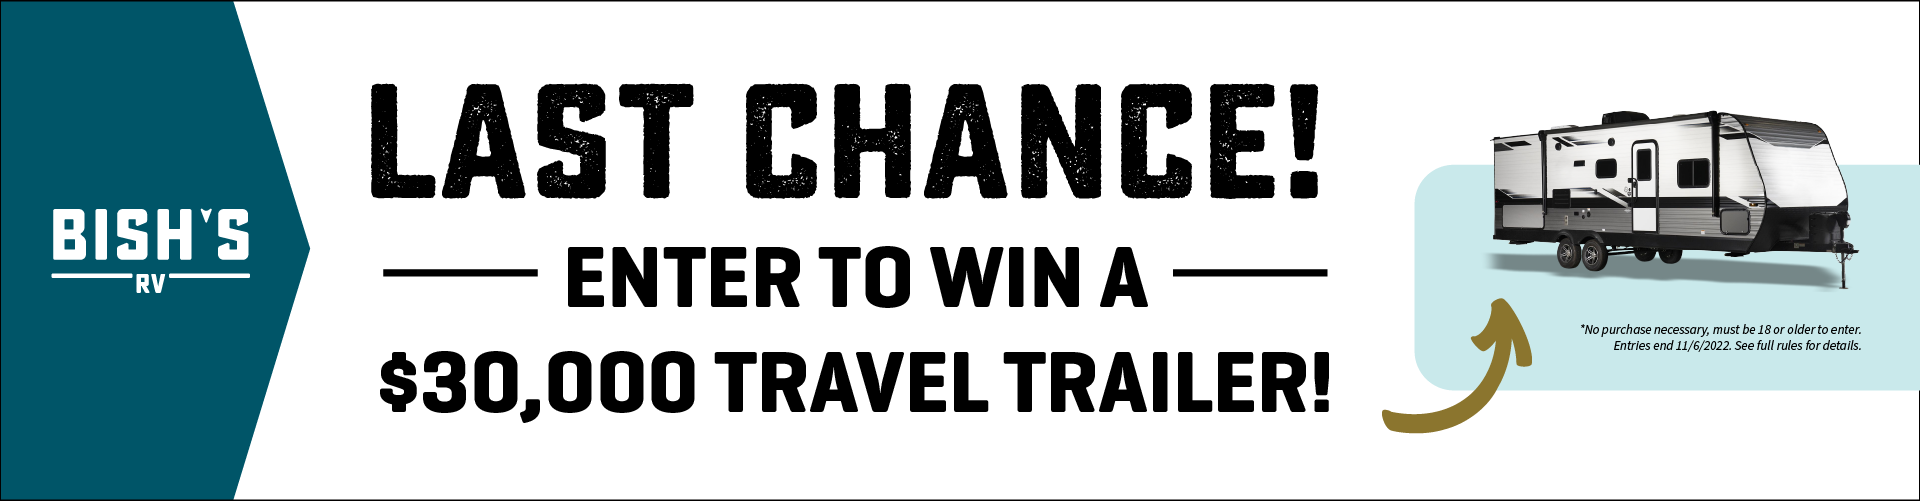 Enter To Win a $30,000 Travel Trailer